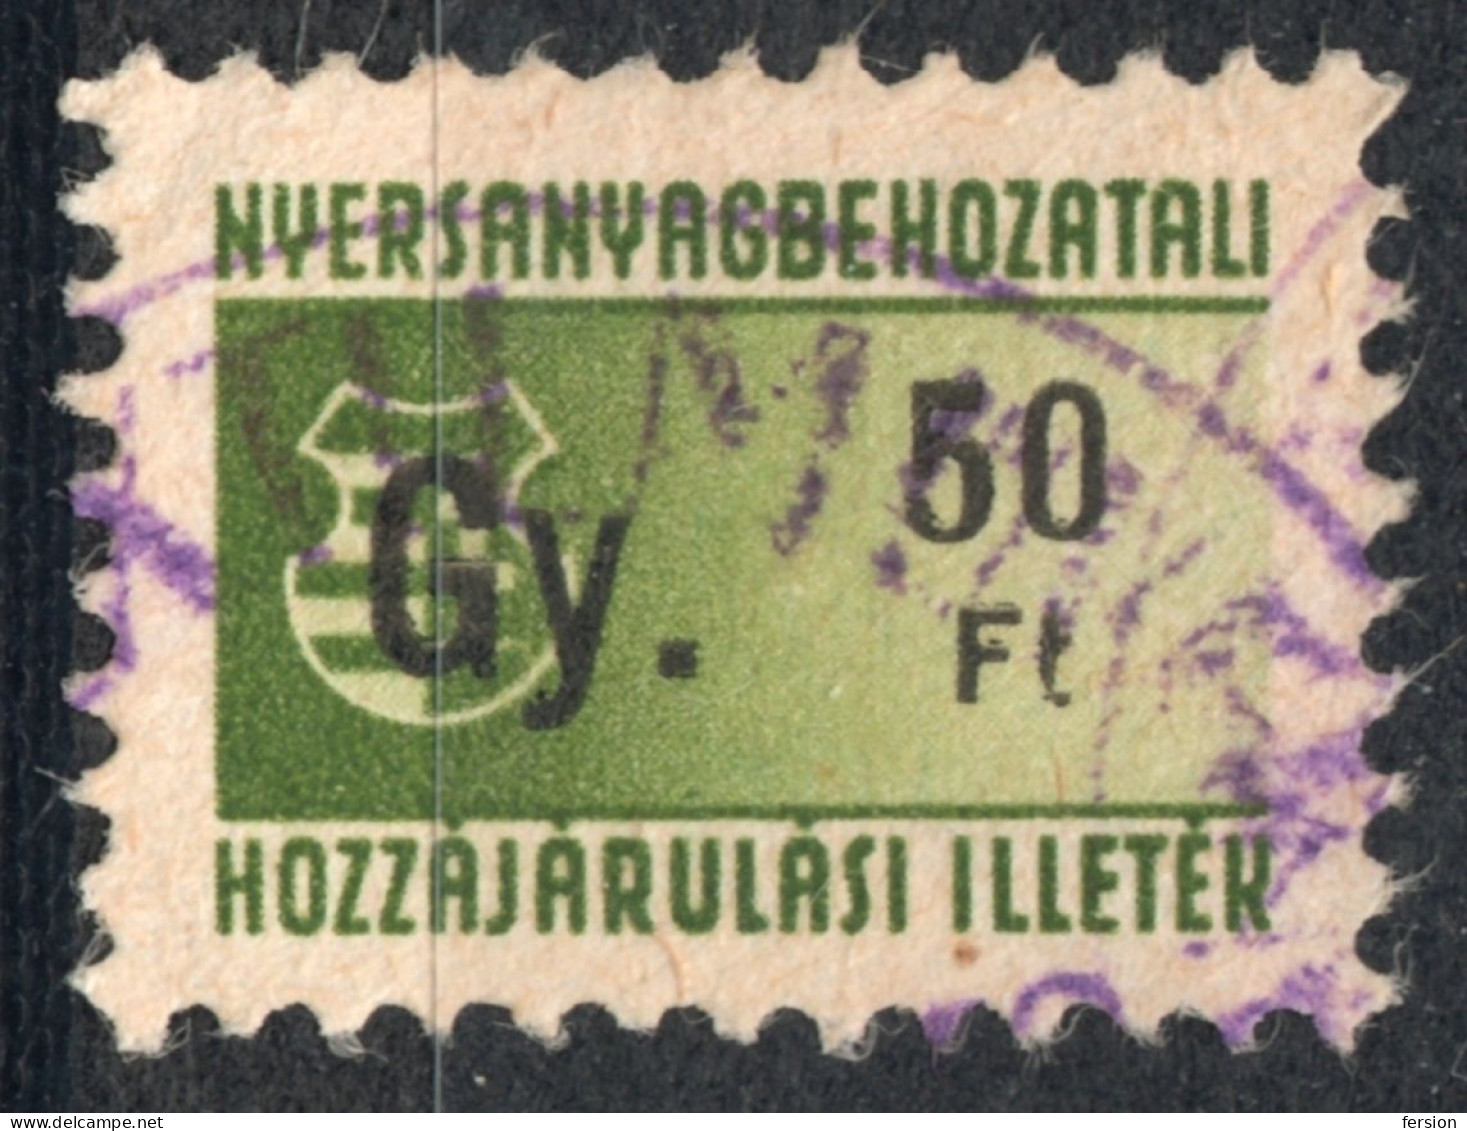 1948 Hungary - Wool Import Tax -  FISCAL BILL - Revenue Stamp - 50 Ft - Used - RR! - KOSSUTH Coat Of Arms - Revenue Stamps